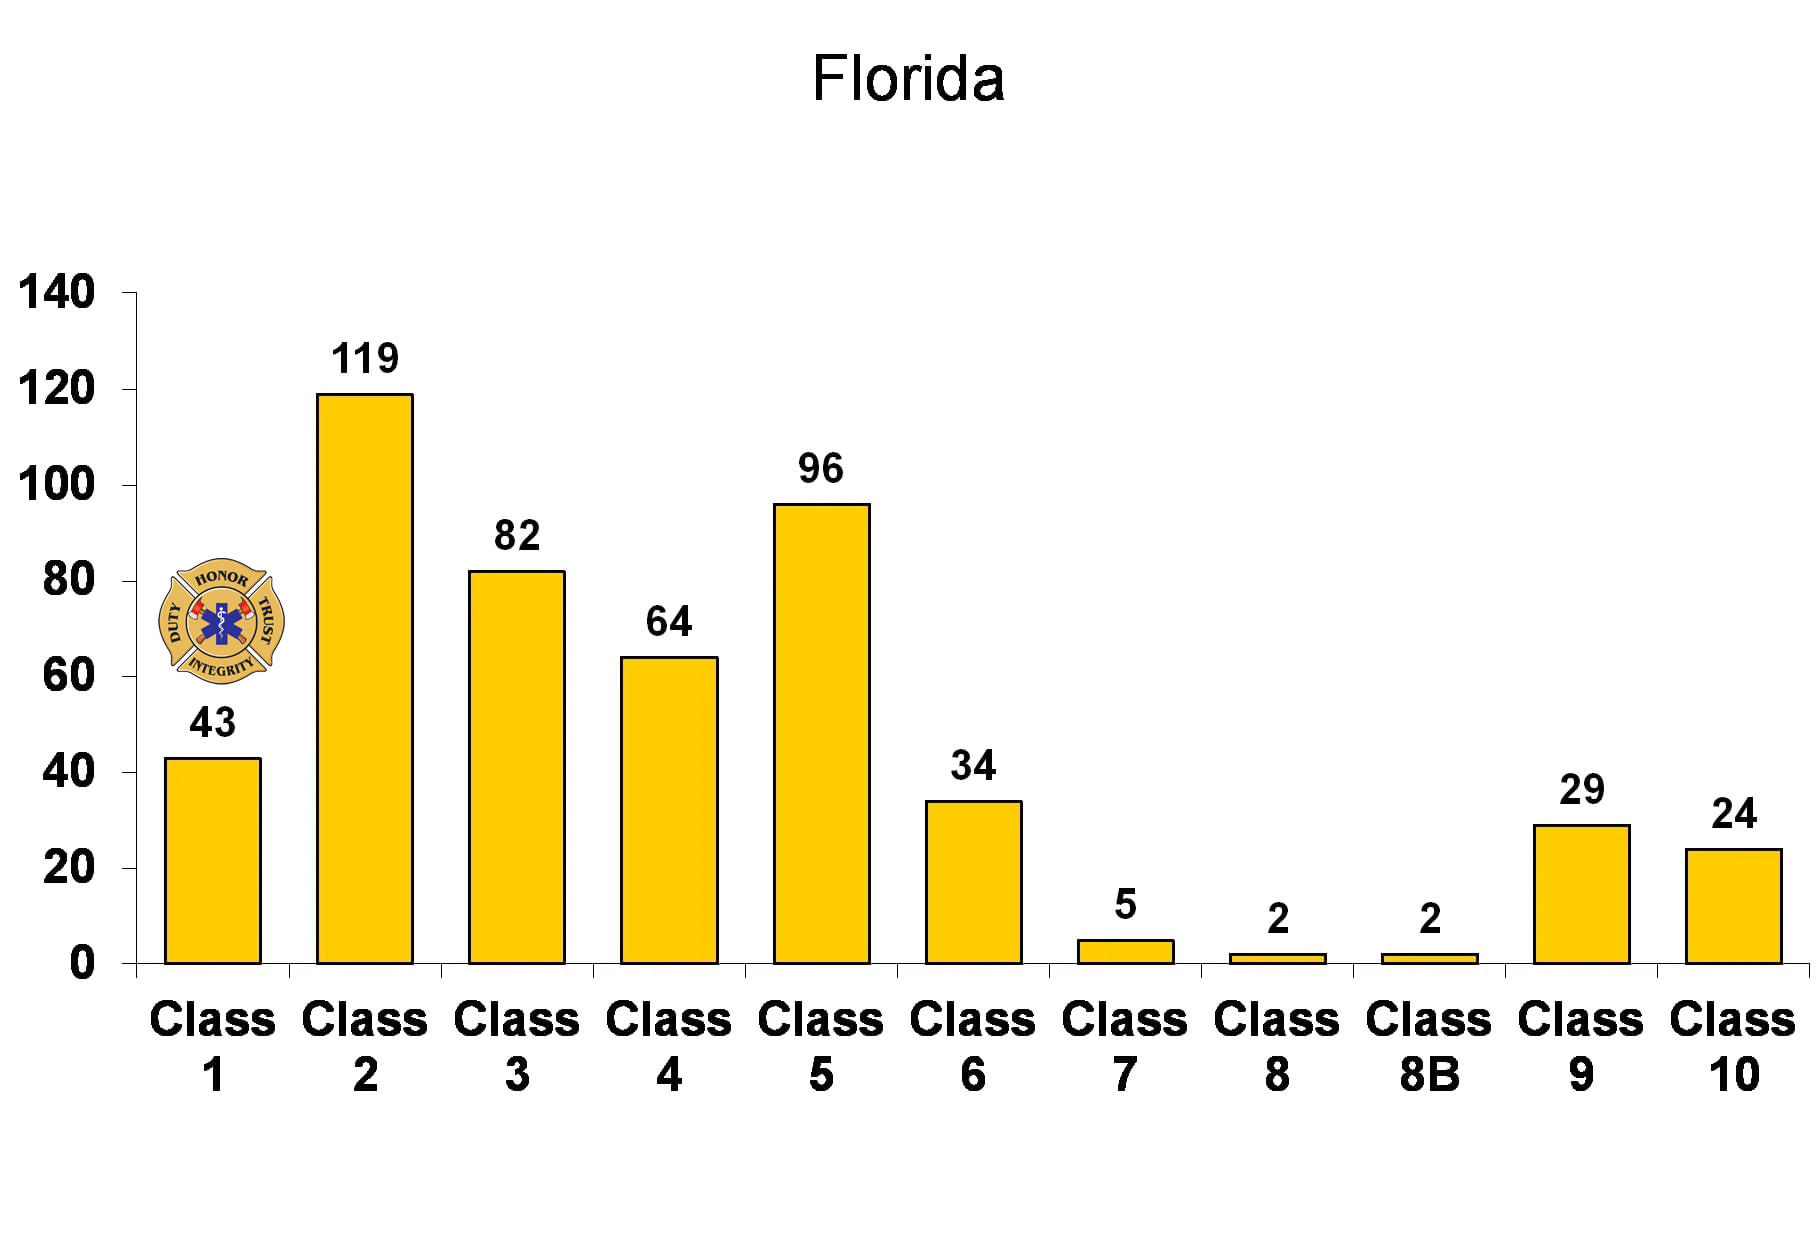 Communities with an ISO 1 rating in the State of Florida as of Aug 2021.